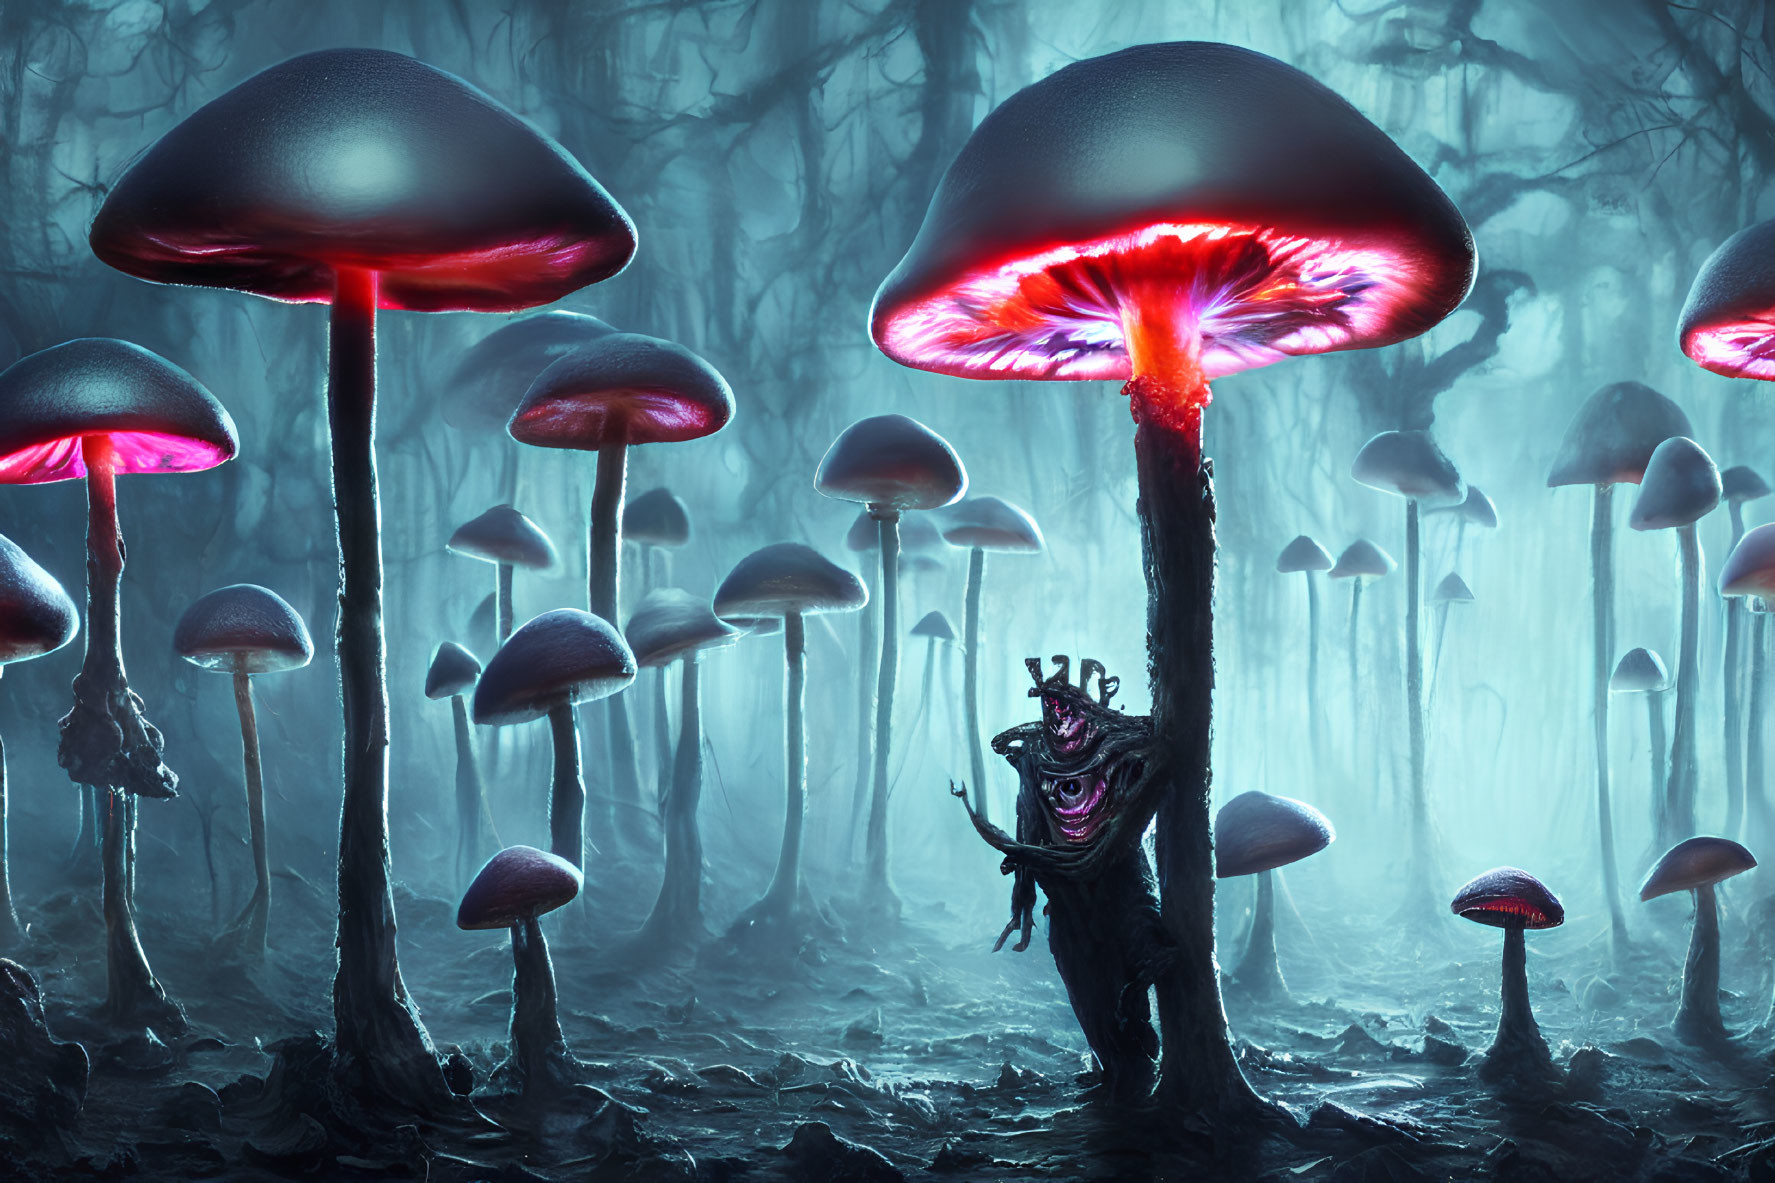 Enchanted forest with oversized glowing mushrooms and whimsical creature